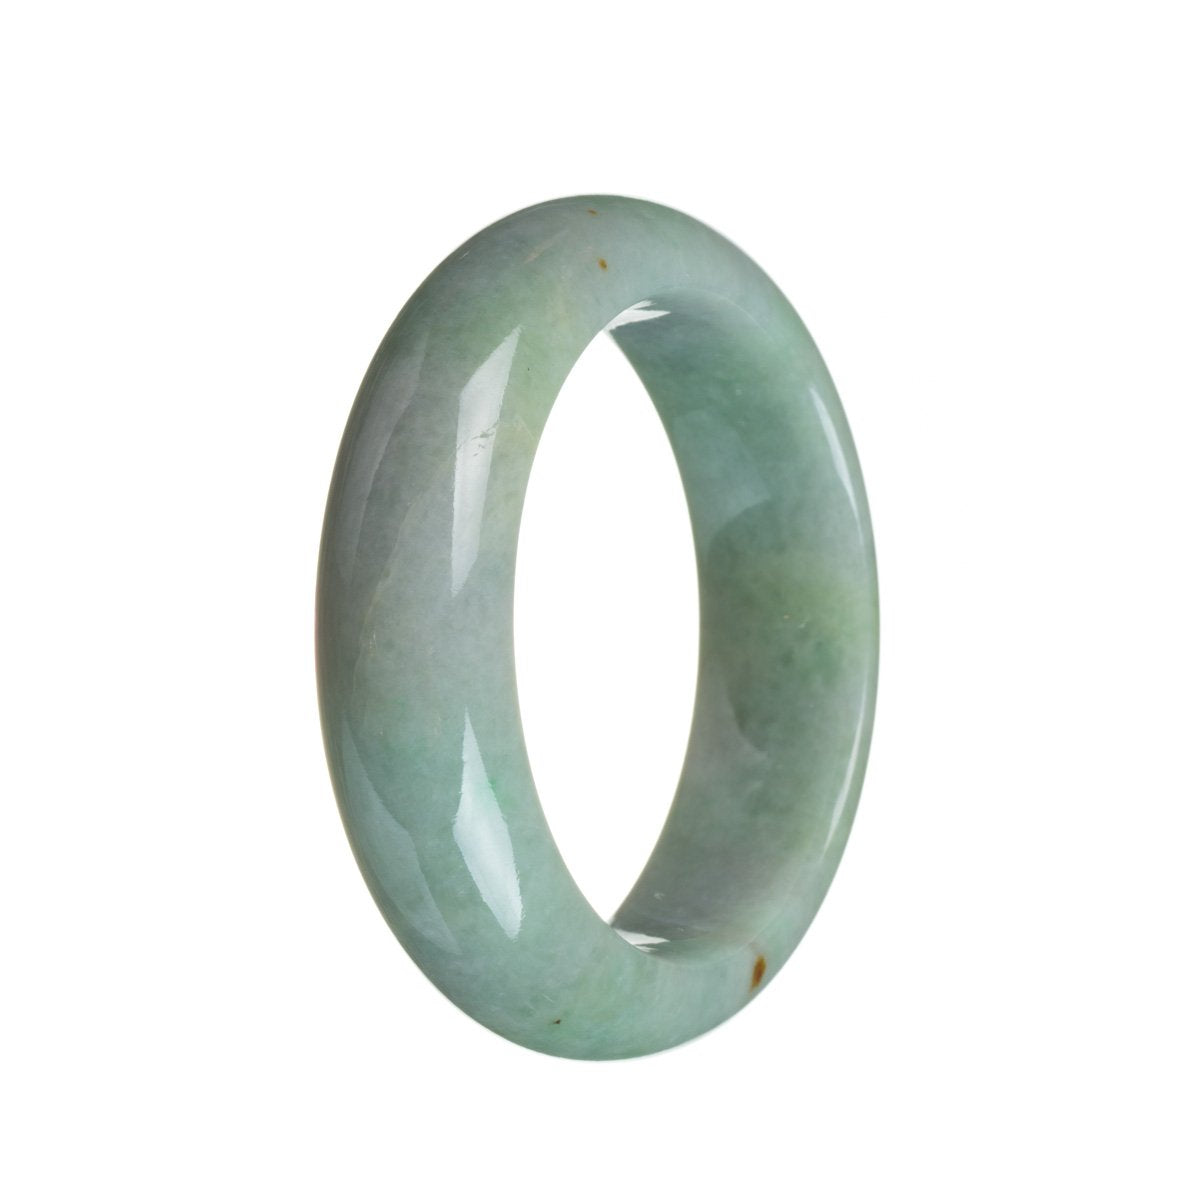 A close-up image of a light green jade bangle with a half-moon shape, measuring 53mm in diameter. The bangle is certified as Type A jade and is from the brand MAYS.